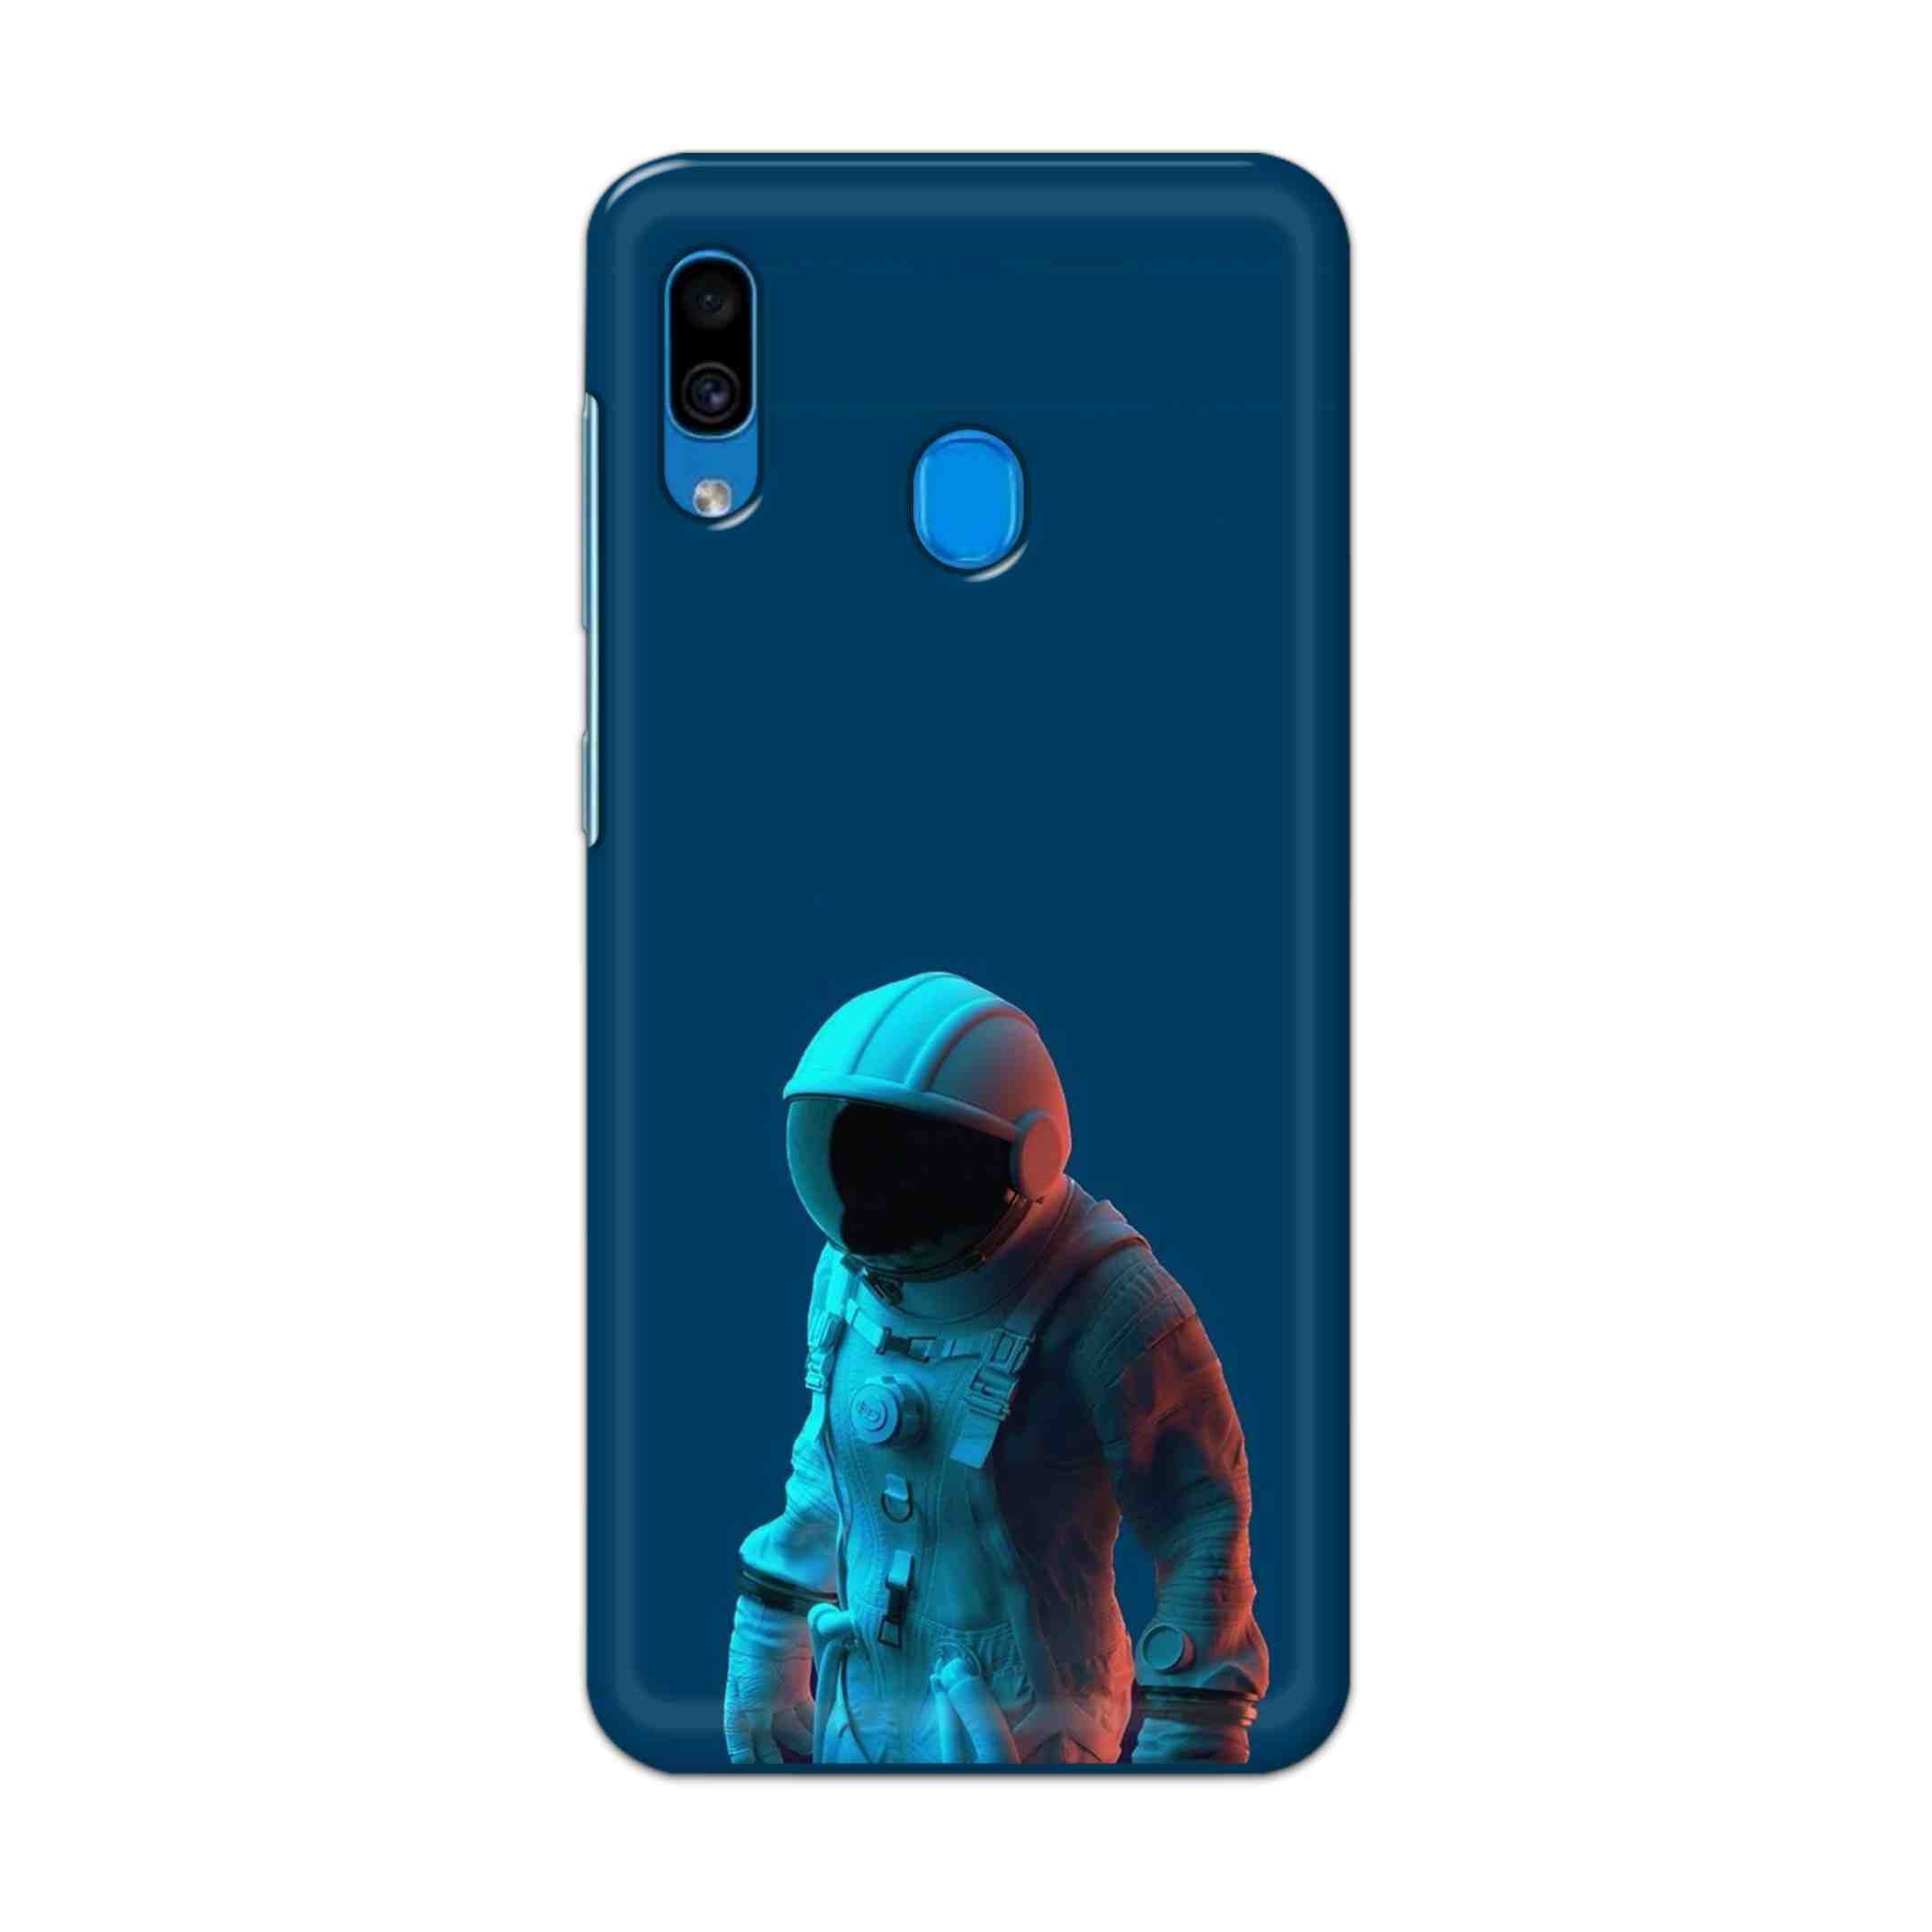 Buy Blue Astronaut Hard Back Mobile Phone Case Cover For Samsung Galaxy A30 Online